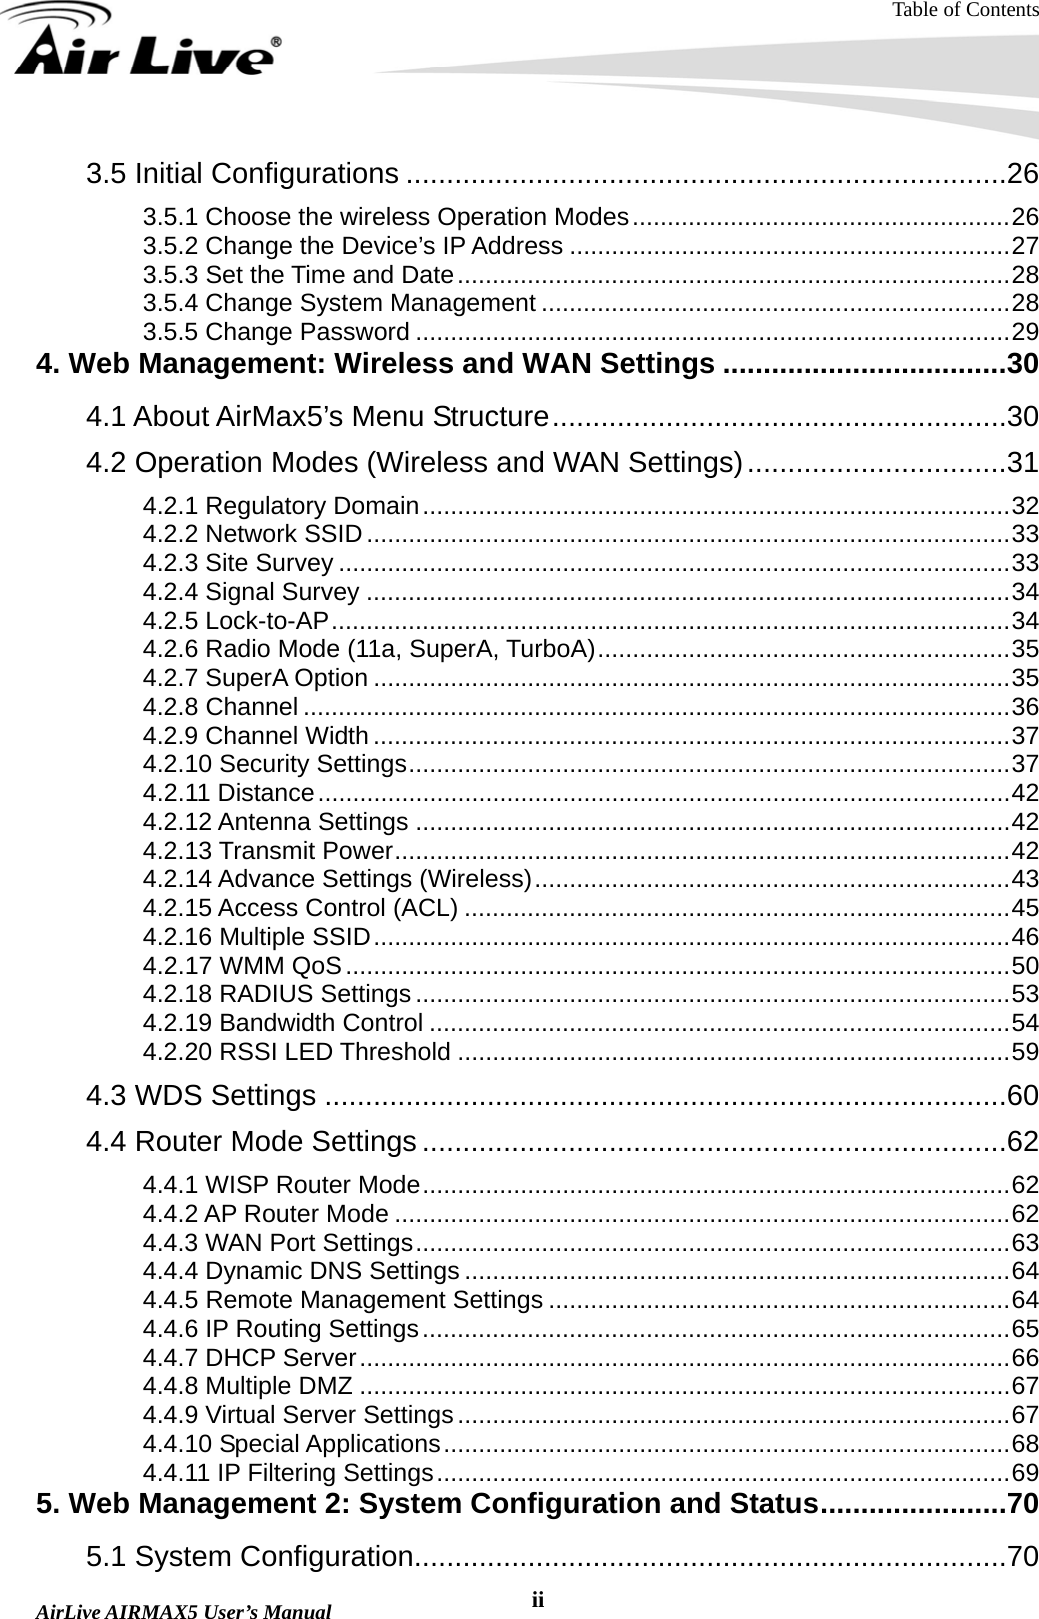 Table of Contents  AirLive AIRMAX5 User’s Manual  ii3.5 Initial Configurations ..........................................................................26 3.5.1 Choose the wireless Operation Modes......................................................26 3.5.2 Change the Device’s IP Address ...............................................................27 3.5.3 Set the Time and Date...............................................................................28 3.5.4 Change System Management ...................................................................28 3.5.5 Change Password .....................................................................................29 4. Web Management: Wireless and WAN Settings ...................................30 4.1 About AirMax5’s Menu Structure........................................................30 4.2 Operation Modes (Wireless and WAN Settings)................................31 4.2.1 Regulatory Domain....................................................................................32 4.2.2 Network SSID............................................................................................33 4.2.3 Site Survey ................................................................................................33 4.2.4 Signal Survey ............................................................................................34 4.2.5 Lock-to-AP.................................................................................................34 4.2.6 Radio Mode (11a, SuperA, TurboA)...........................................................35 4.2.7 SuperA Option ...........................................................................................35 4.2.8 Channel .....................................................................................................36 4.2.9 Channel Width...........................................................................................37 4.2.10 Security Settings......................................................................................37 4.2.11 Distance...................................................................................................42 4.2.12 Antenna Settings .....................................................................................42 4.2.13 Transmit Power........................................................................................42 4.2.14 Advance Settings (Wireless)....................................................................43 4.2.15 Access Control (ACL) ..............................................................................45 4.2.16 Multiple SSID...........................................................................................46 4.2.17 WMM QoS...............................................................................................50 4.2.18 RADIUS Settings .....................................................................................53 4.2.19 Bandwidth Control ...................................................................................54 4.2.20 RSSI LED Threshold ...............................................................................59 4.3 WDS Settings ....................................................................................60 4.4 Router Mode Settings ........................................................................62 4.4.1 WISP Router Mode....................................................................................62 4.4.2 AP Router Mode ........................................................................................62 4.4.3 WAN Port Settings.....................................................................................63 4.4.4 Dynamic DNS Settings ..............................................................................64 4.4.5 Remote Management Settings ..................................................................64 4.4.6 IP Routing Settings....................................................................................65 4.4.7 DHCP Server.............................................................................................66 4.4.8 Multiple DMZ .............................................................................................67 4.4.9 Virtual Server Settings...............................................................................67 4.4.10 Special Applications.................................................................................68 4.4.11 IP Filtering Settings..................................................................................69 5. Web Management 2: System Configuration and Status.......................70 5.1 System Configuration.........................................................................70 